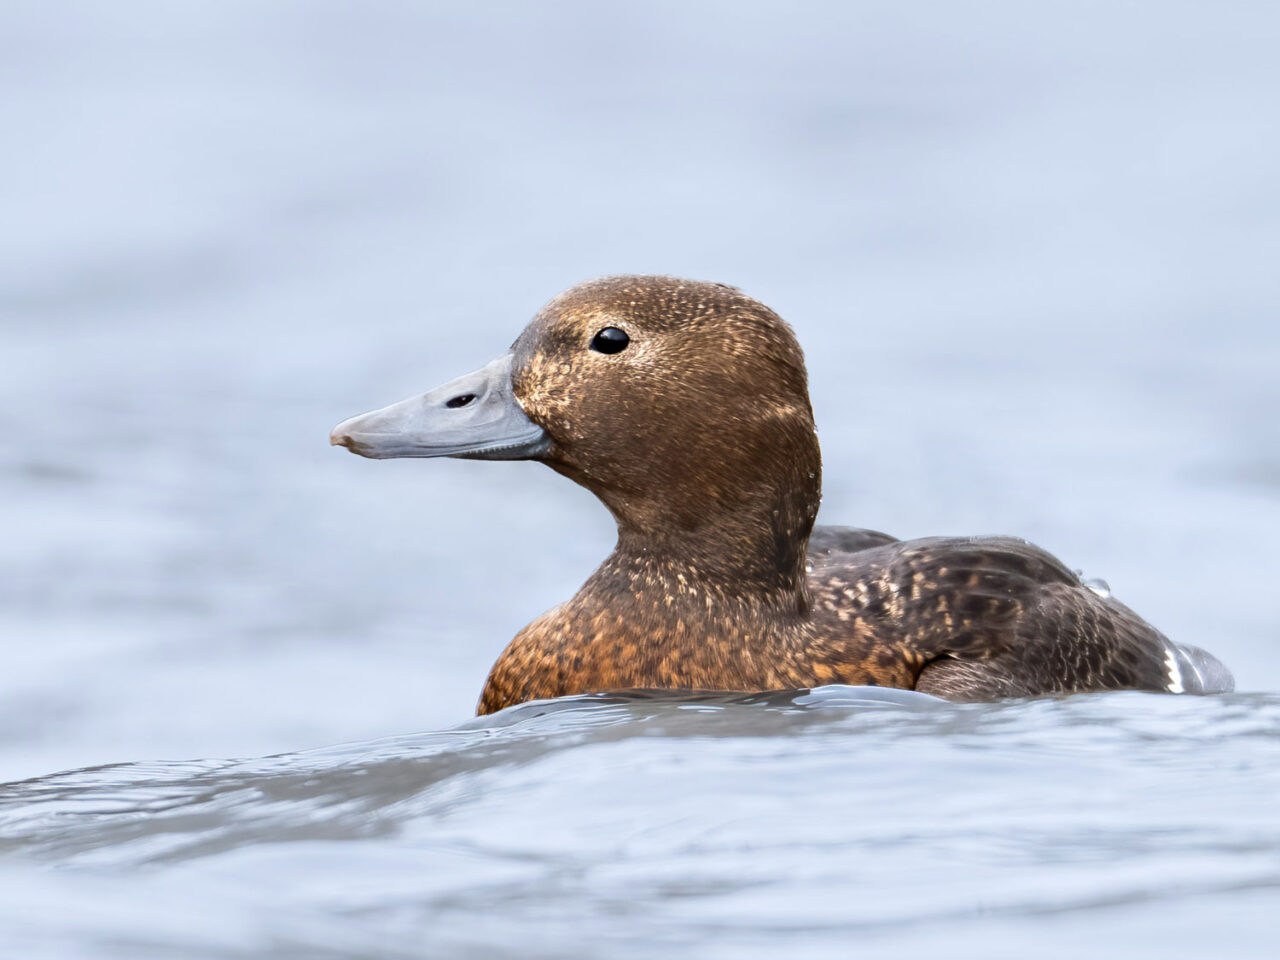 a brown duck sits on calm water with a small wave in the foreground